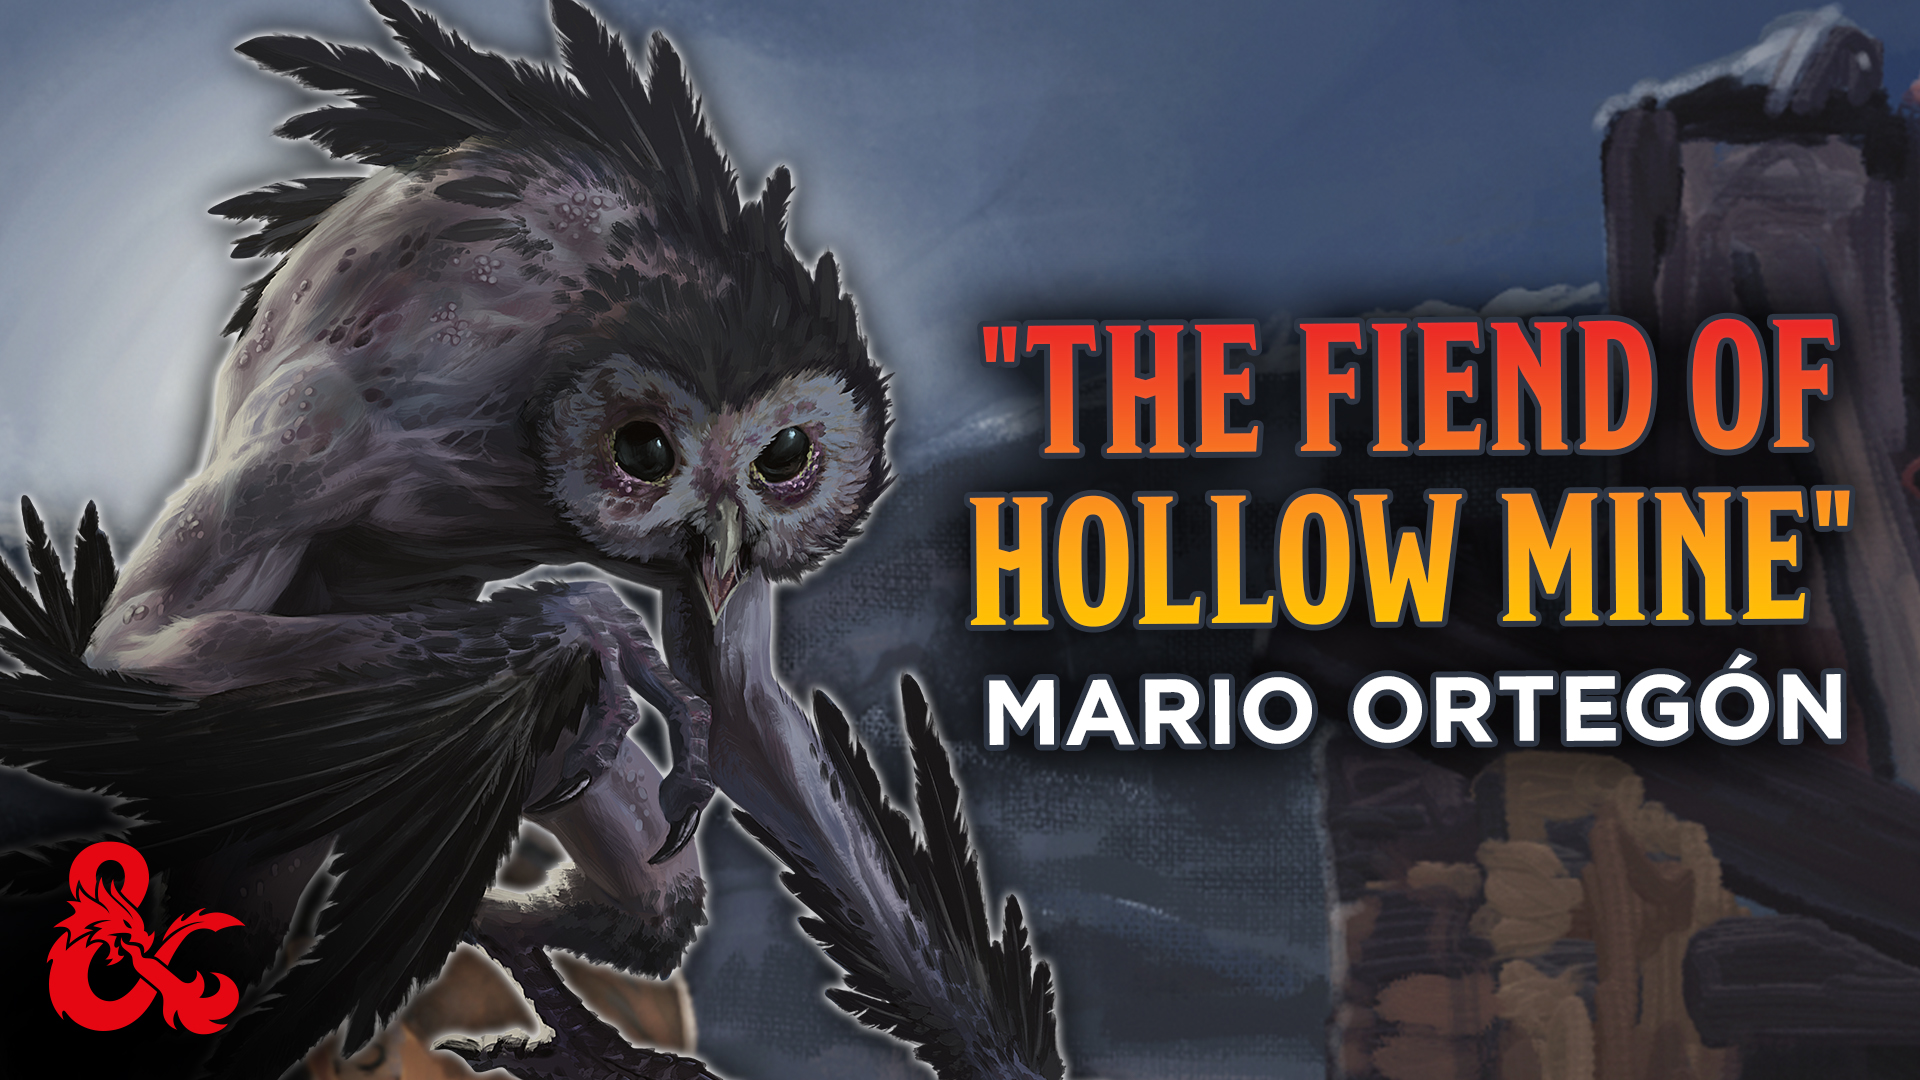 You are currently viewing The Fiend of Hollow Mine